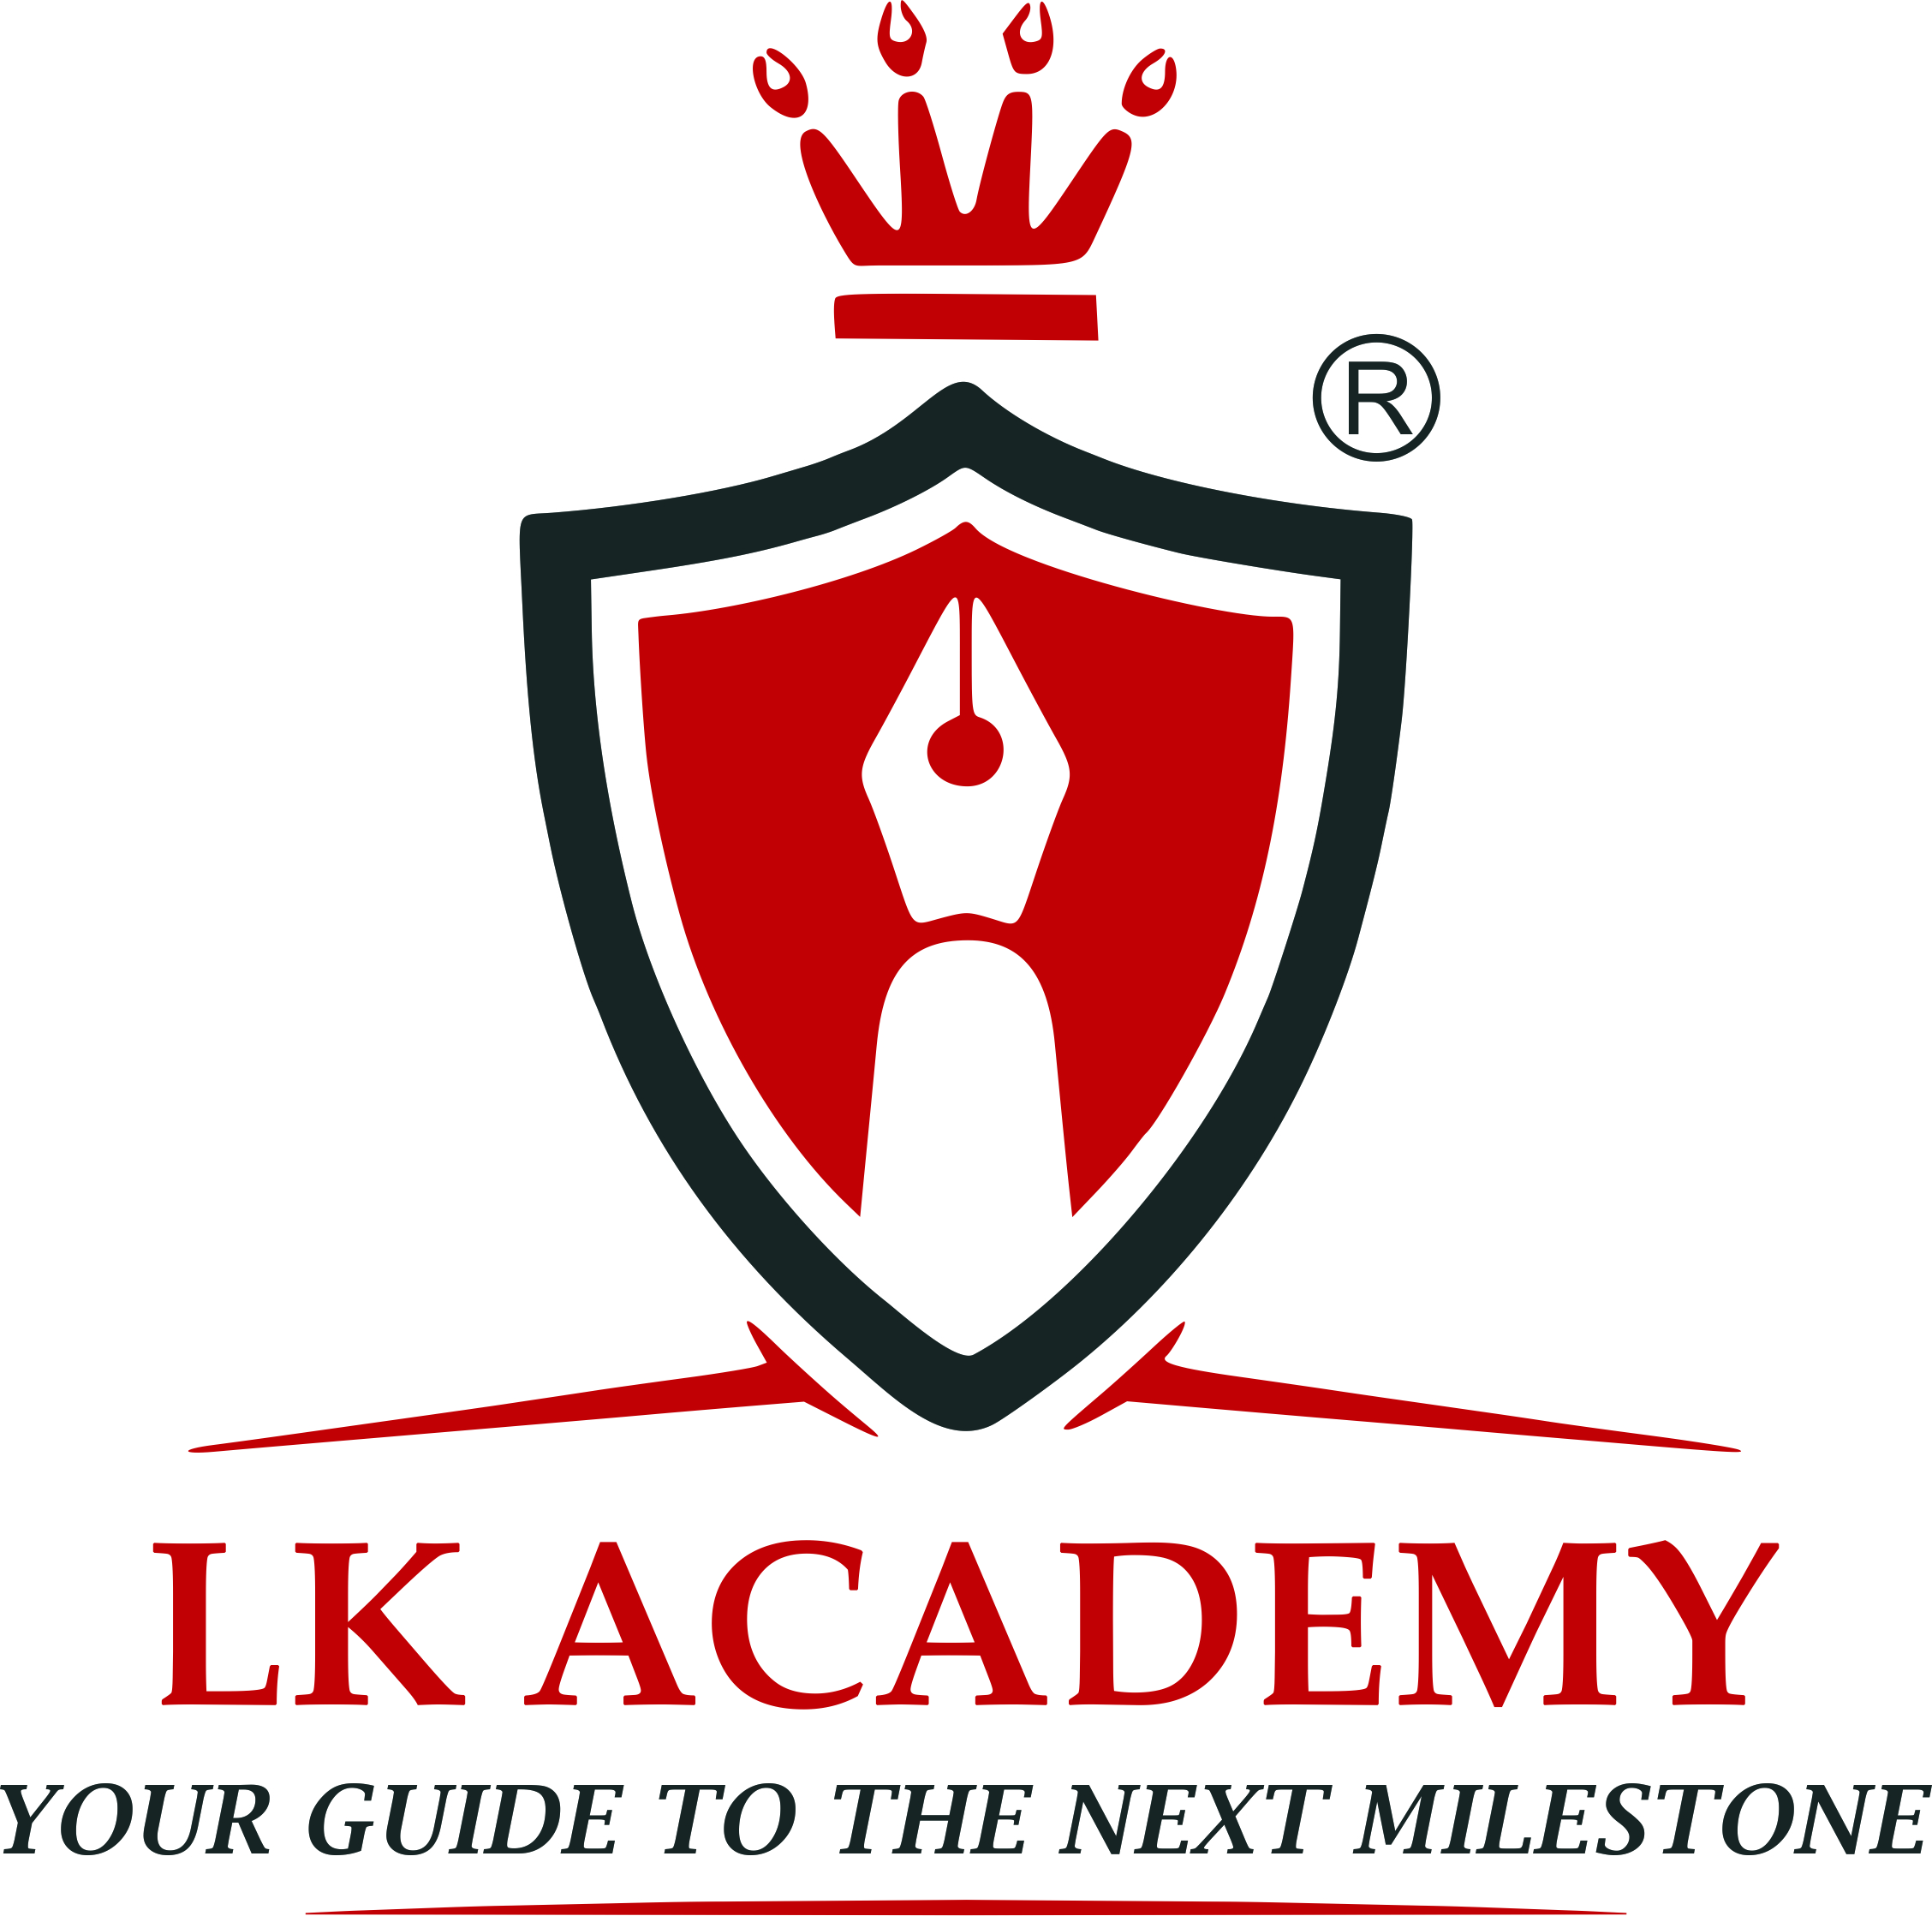 LK Academy|Colleges|Education